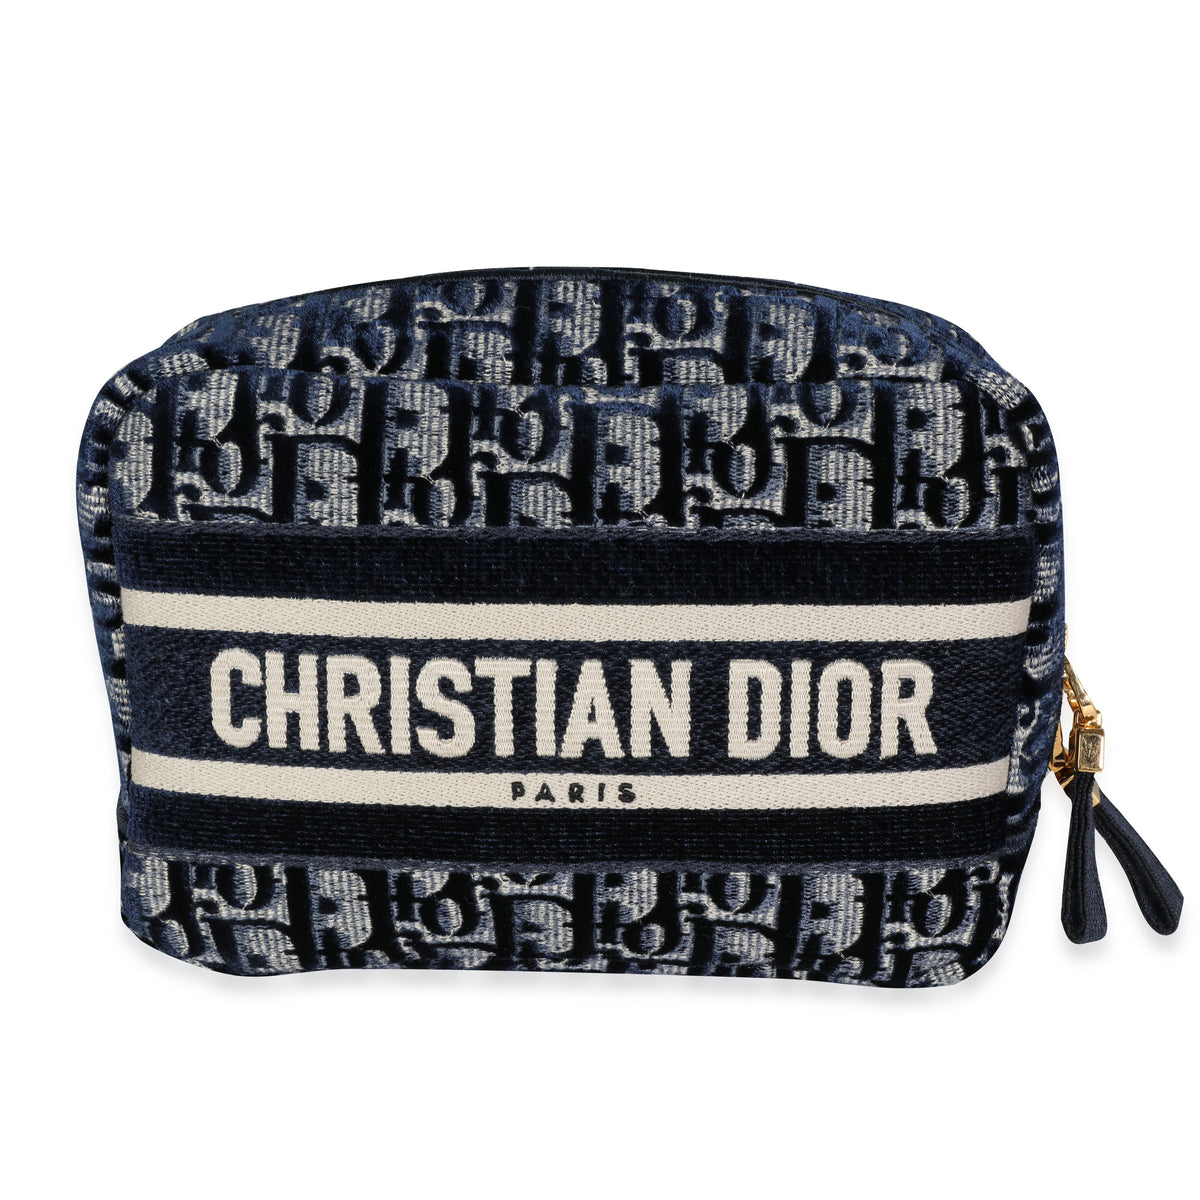 DIOR Crossbody black & gold Chain Purse Evening Bag Clutch cosmetic  beauty pouch